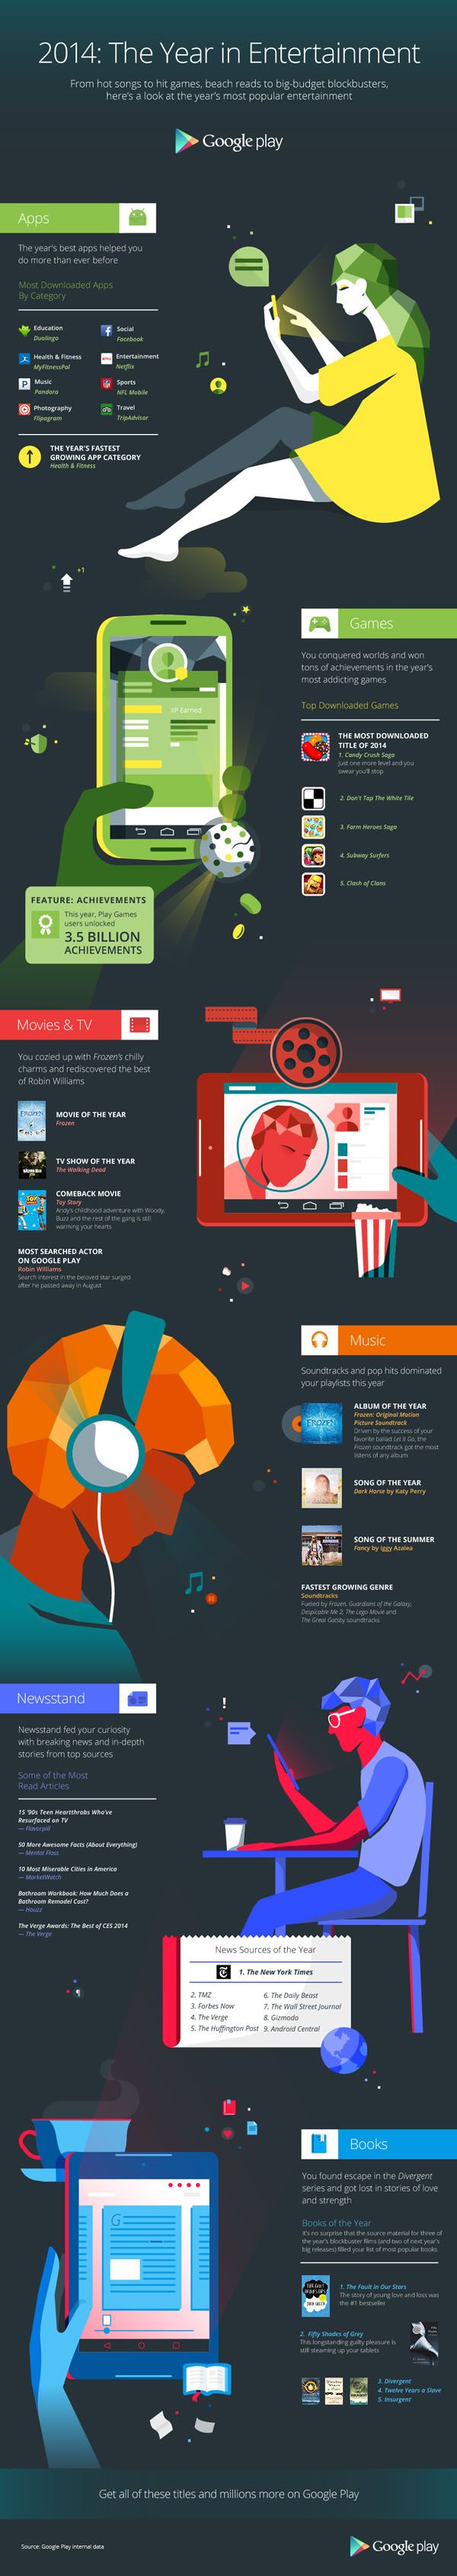 Google-Play-End-of-Year-Infographic-2014-FINAL-600px.jpg